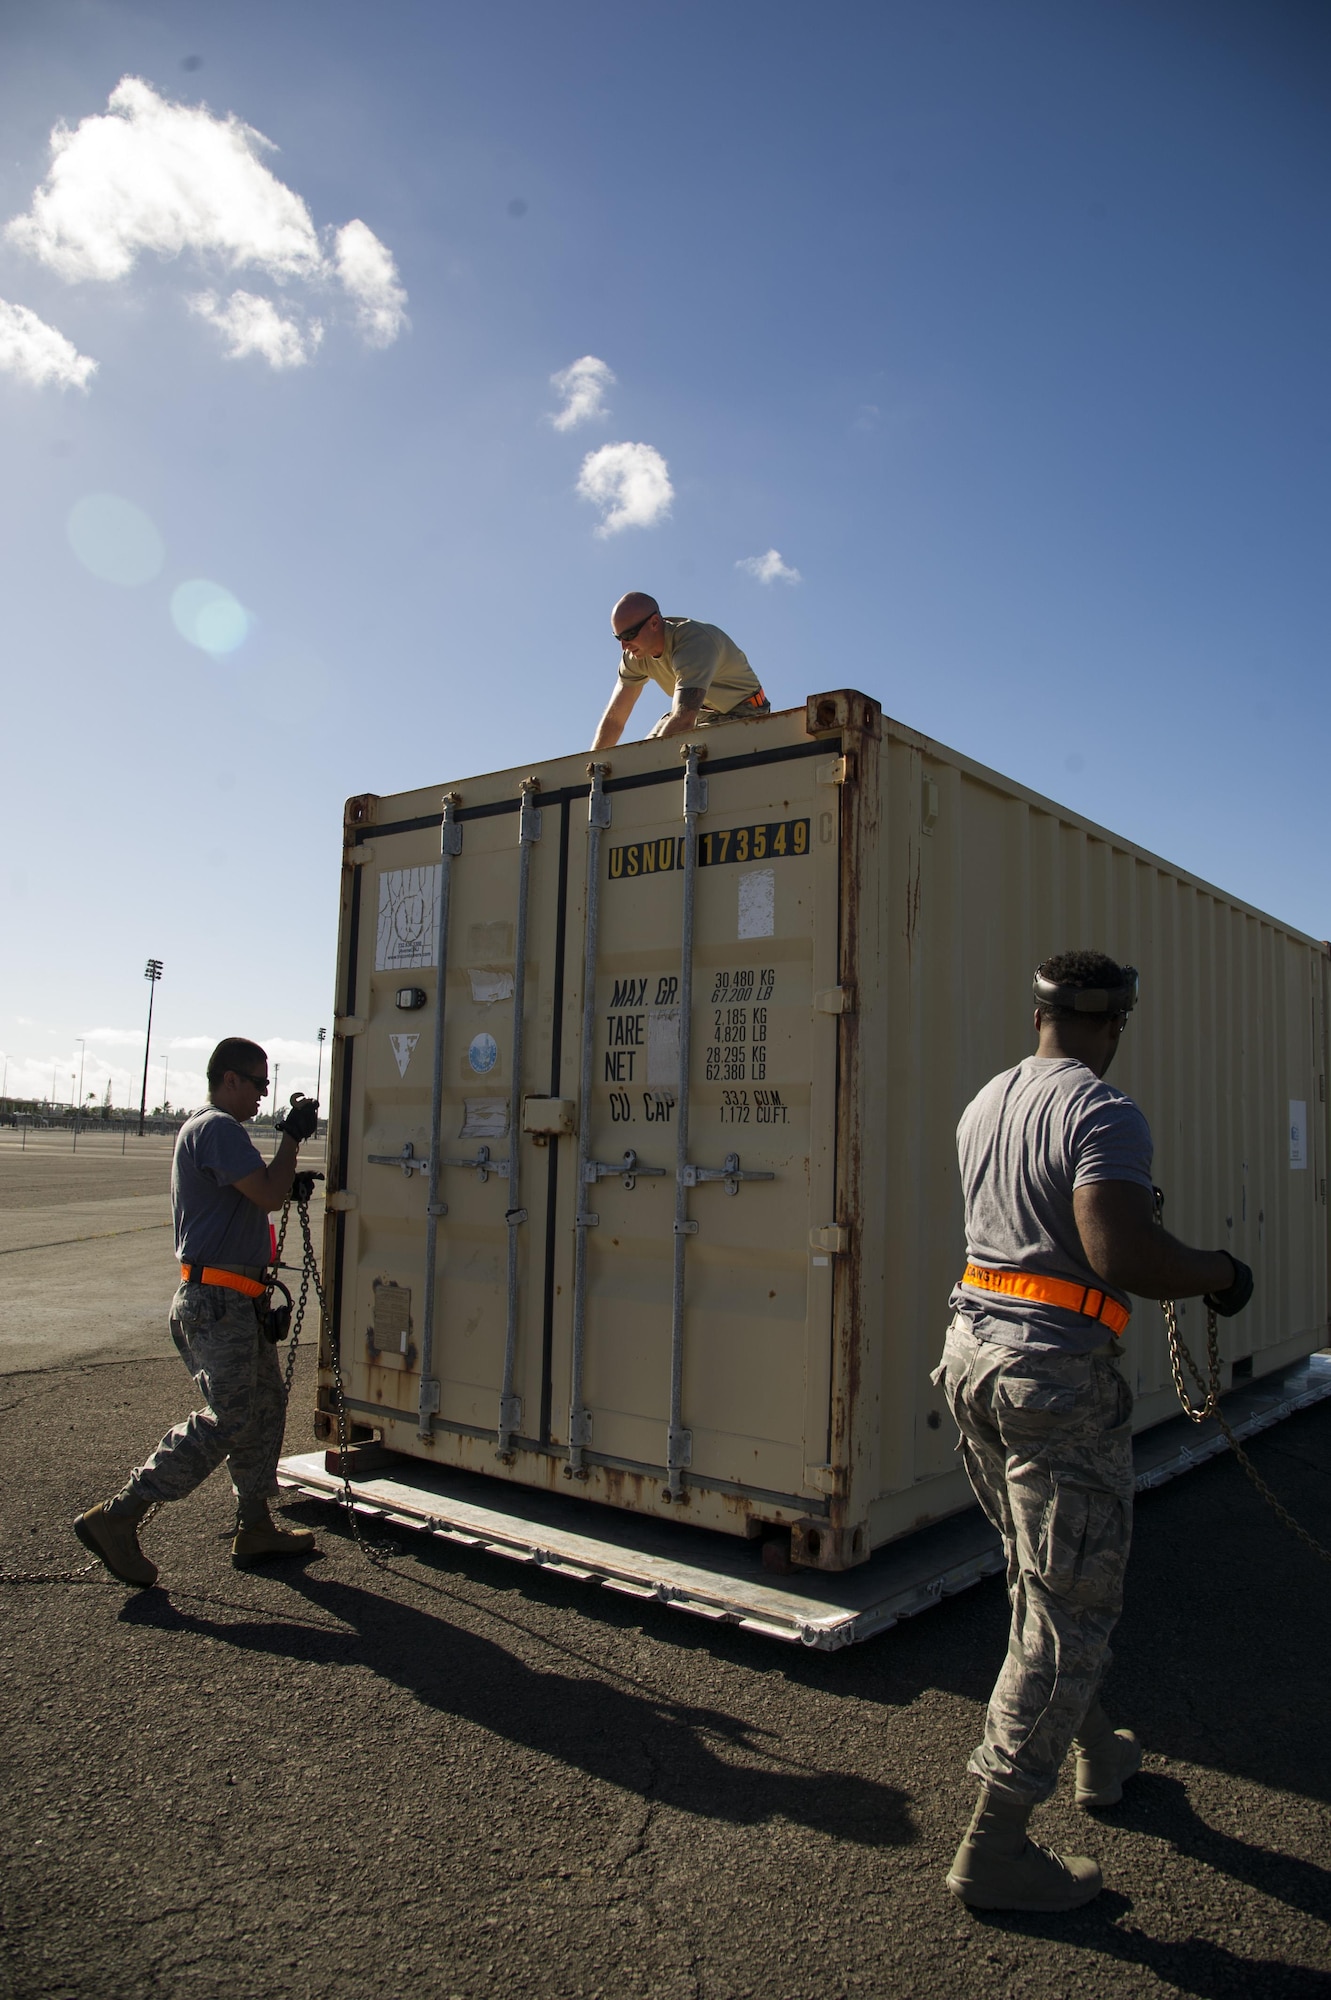 Tech. Sgt. Daniel Arrez, Staff Sgt. Nicholas Worrell, and Staff Sgt. Byron Patrick, from the 735th Air Mobility Squadron, secure a shipping container for the pallet build-up competition during the Hickam Port Dawg Challenge, at Joint Base Pearl Harbor-Hickam, Hawaii, Nov. 17, 2017. The aerial port community hosts a Port Dawg Challenge every year to promote professionalism, and demonstrate air and space expeditionary force capabilities. (U.S. Air Force photo by Tech. Sgt. Heather Redman)